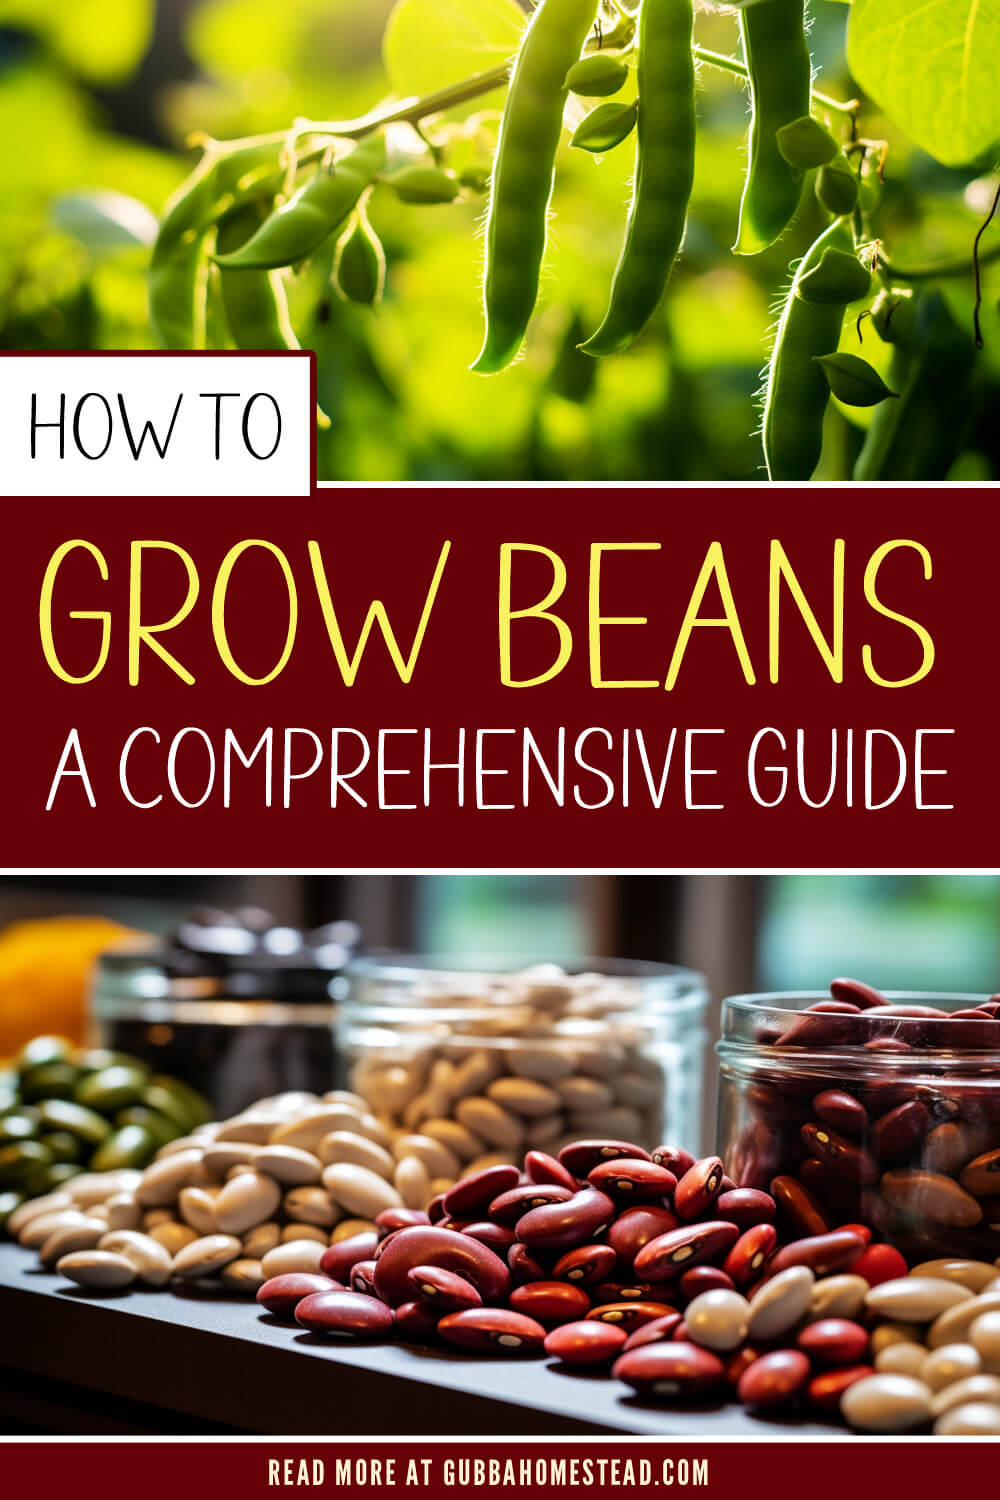 How to Grow Beans: A Comprehensive Guide to Growing Pole Beans, Bush Beans, and Bean Seeds